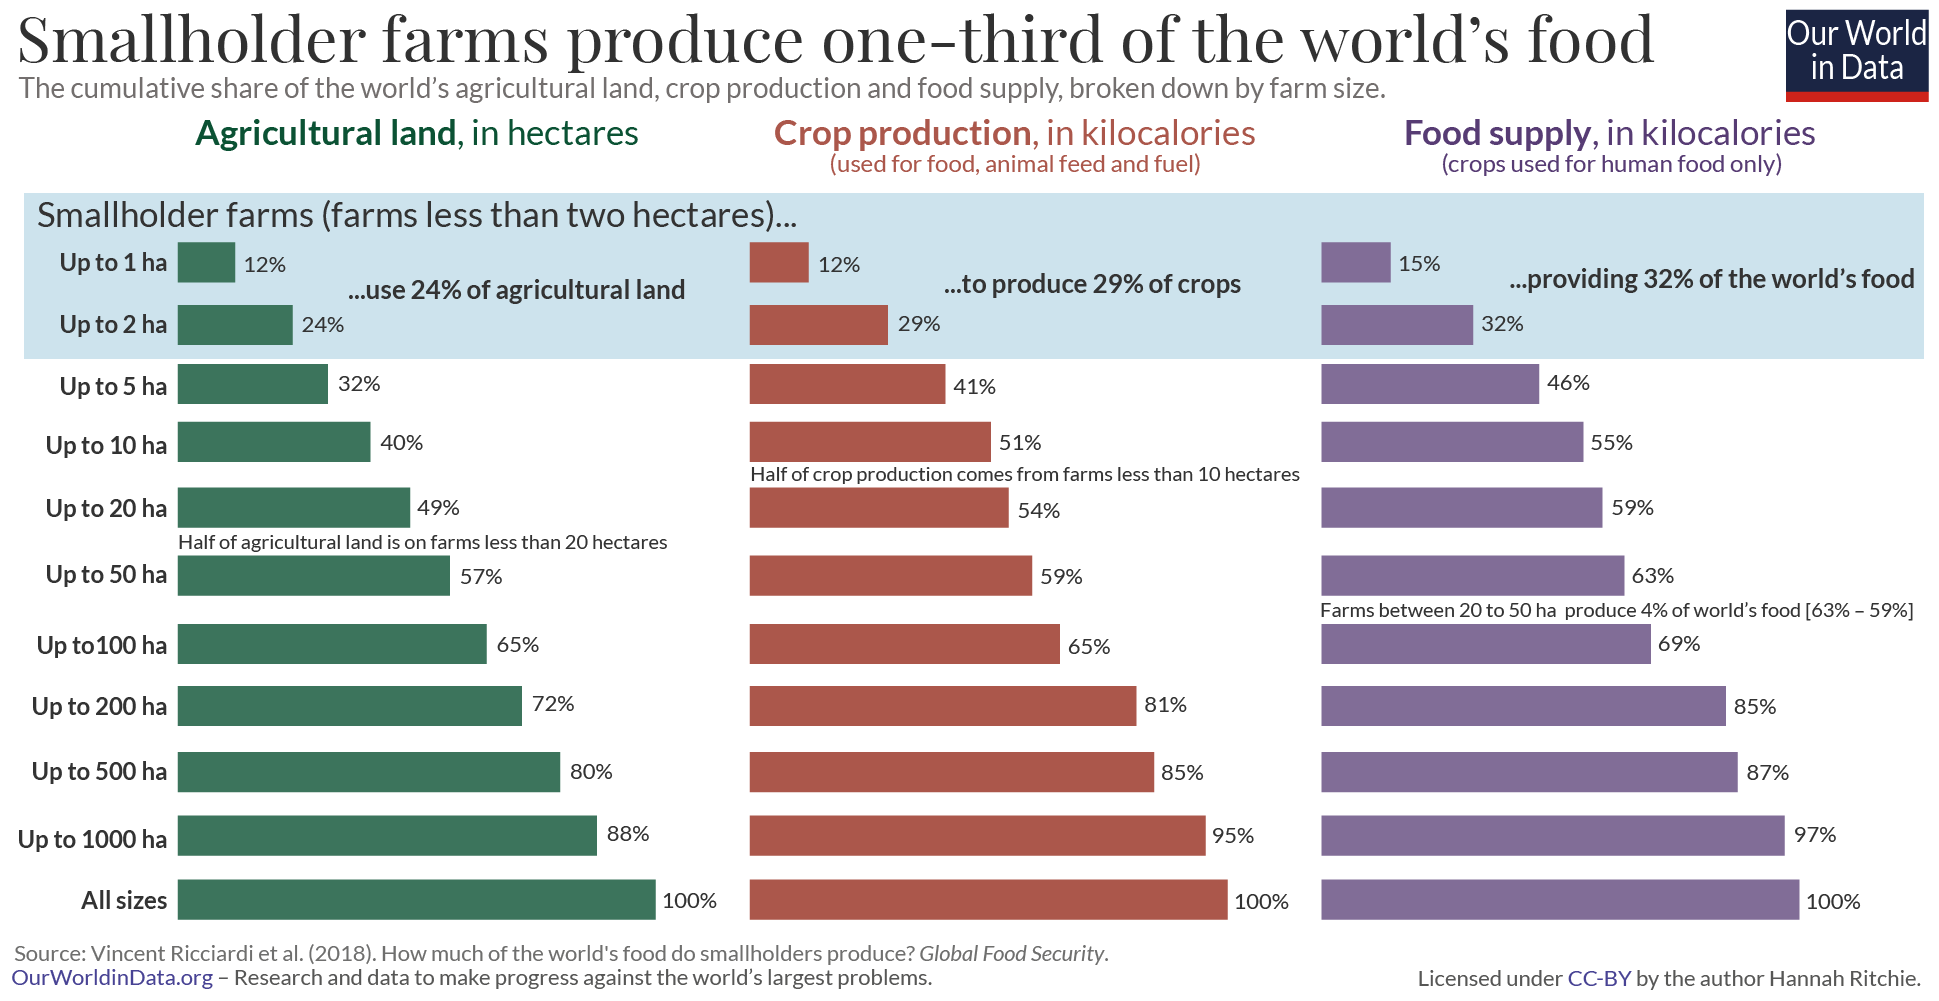 https://ourworldindata.org/images/published/How-much-of-the-worlds-food-do-smallholders-produce.png